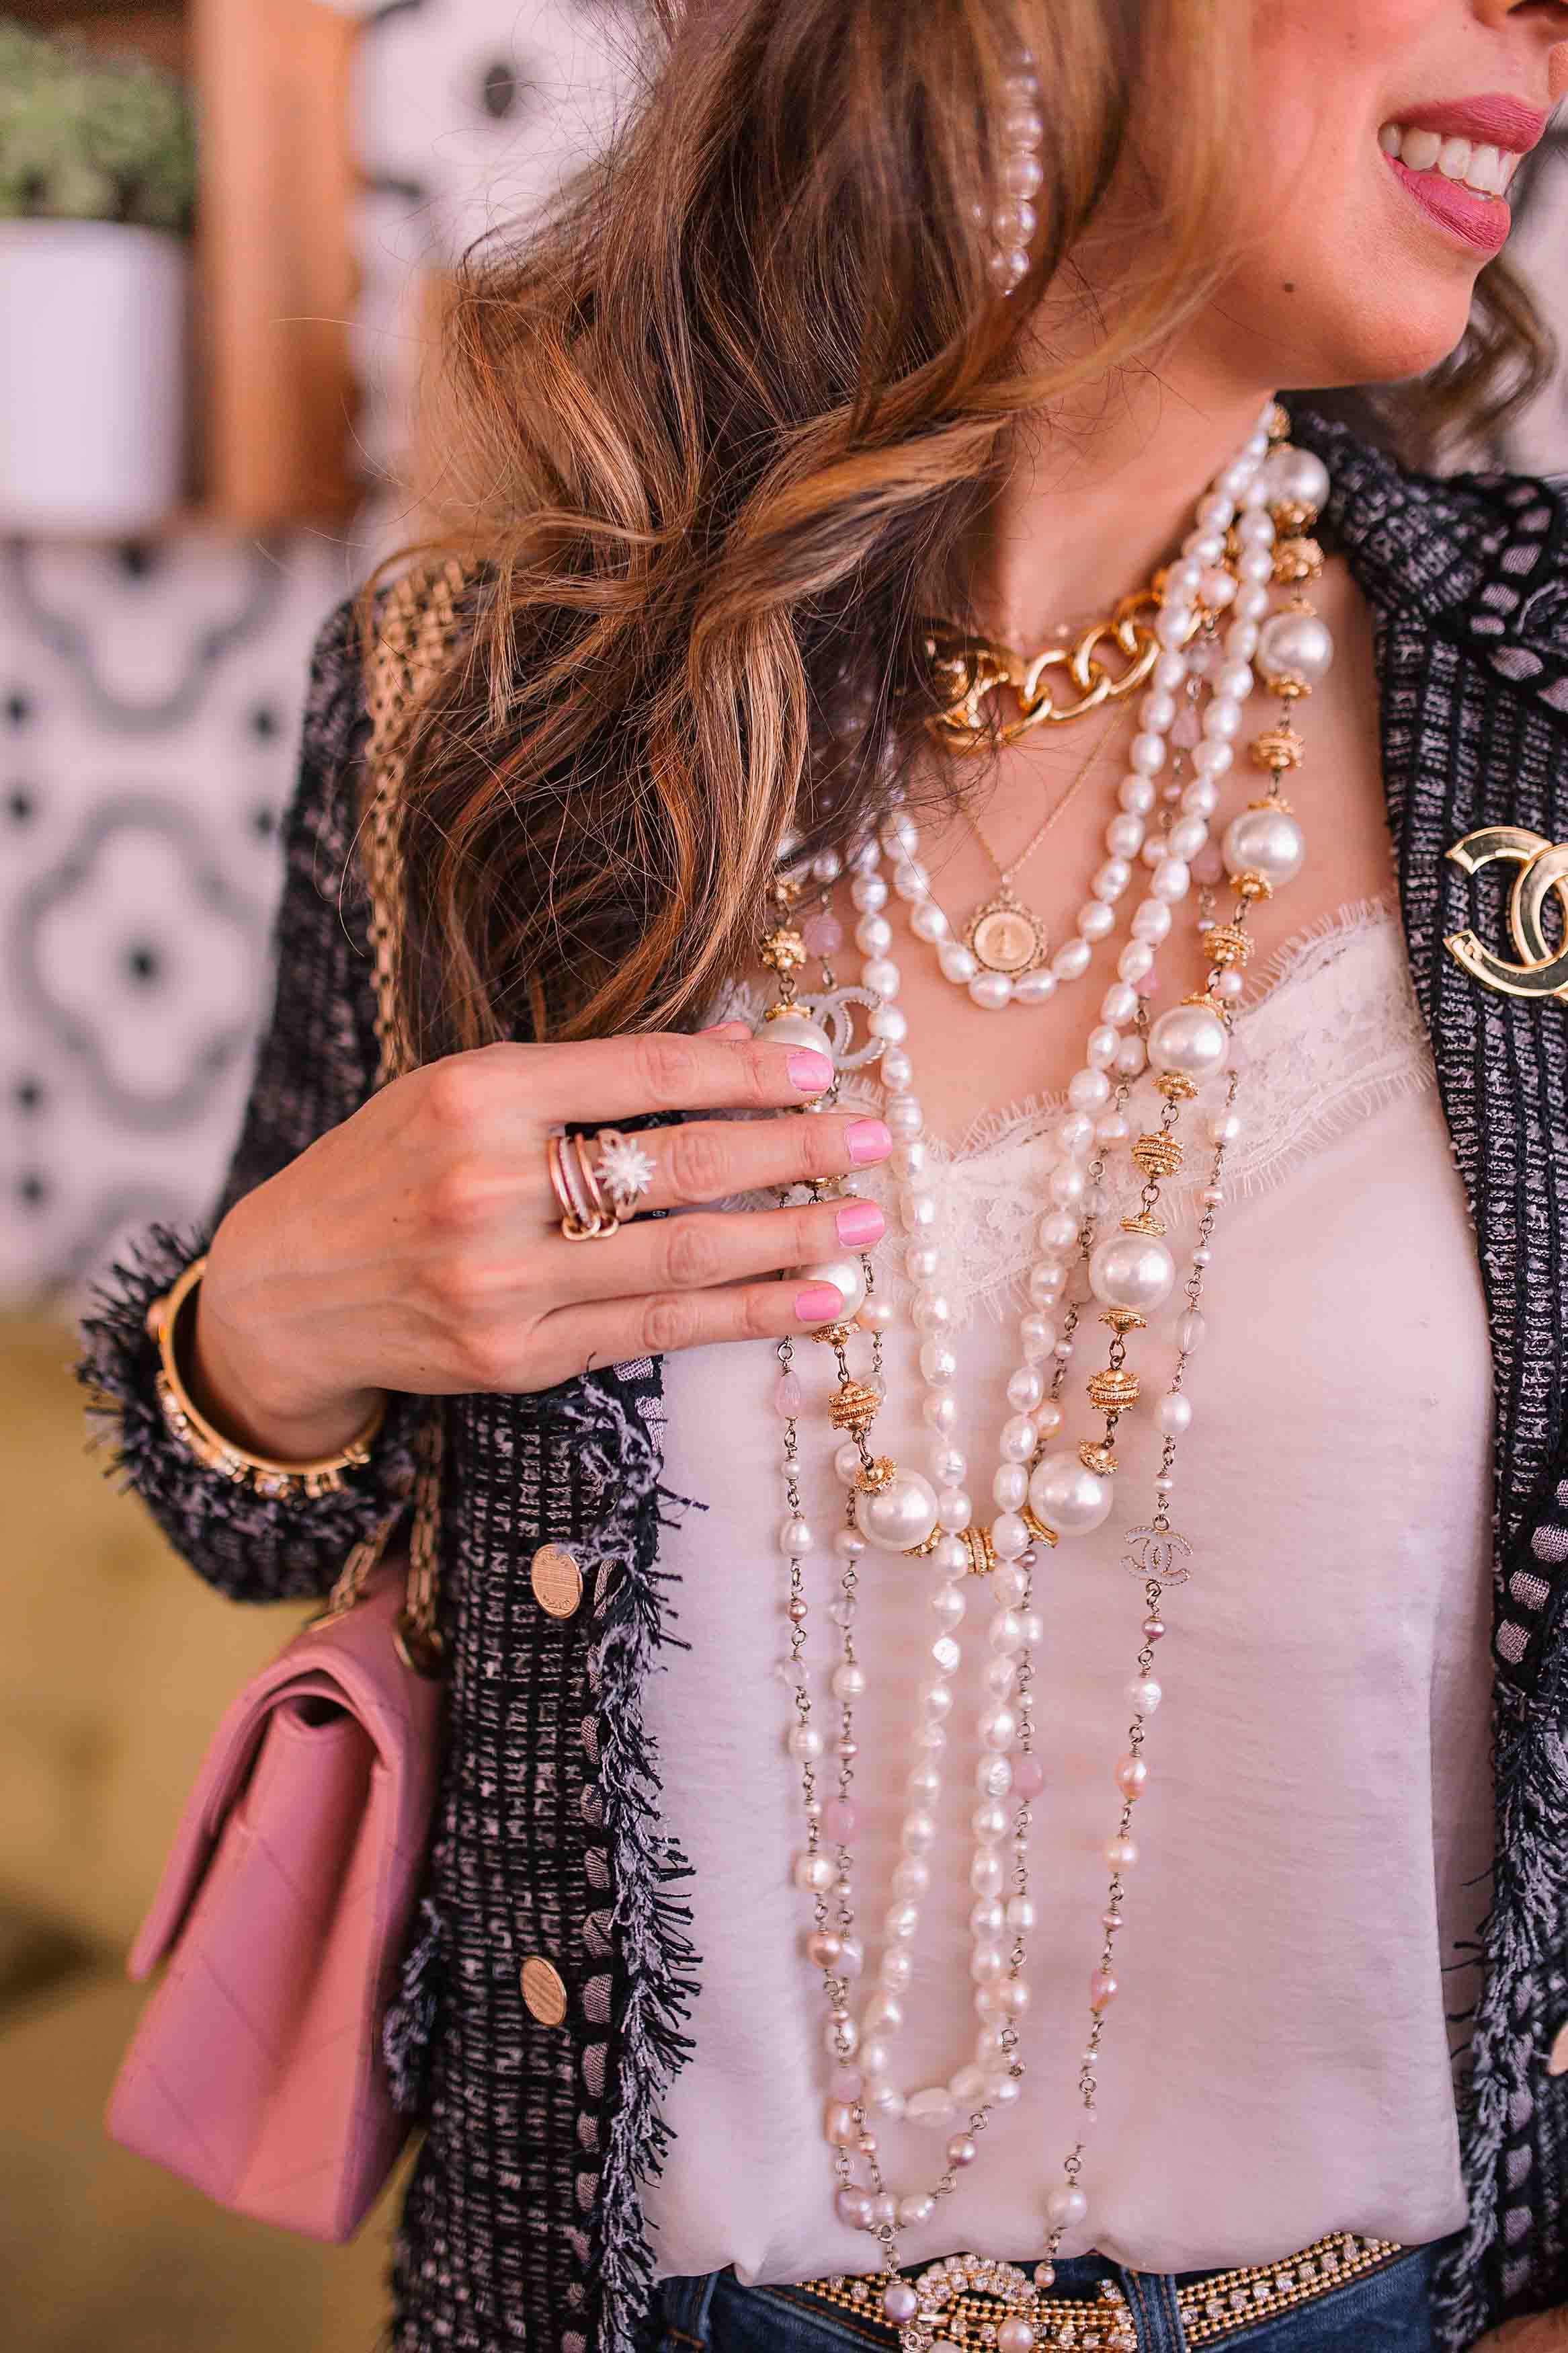 How to wear… Chanel Style Jacket